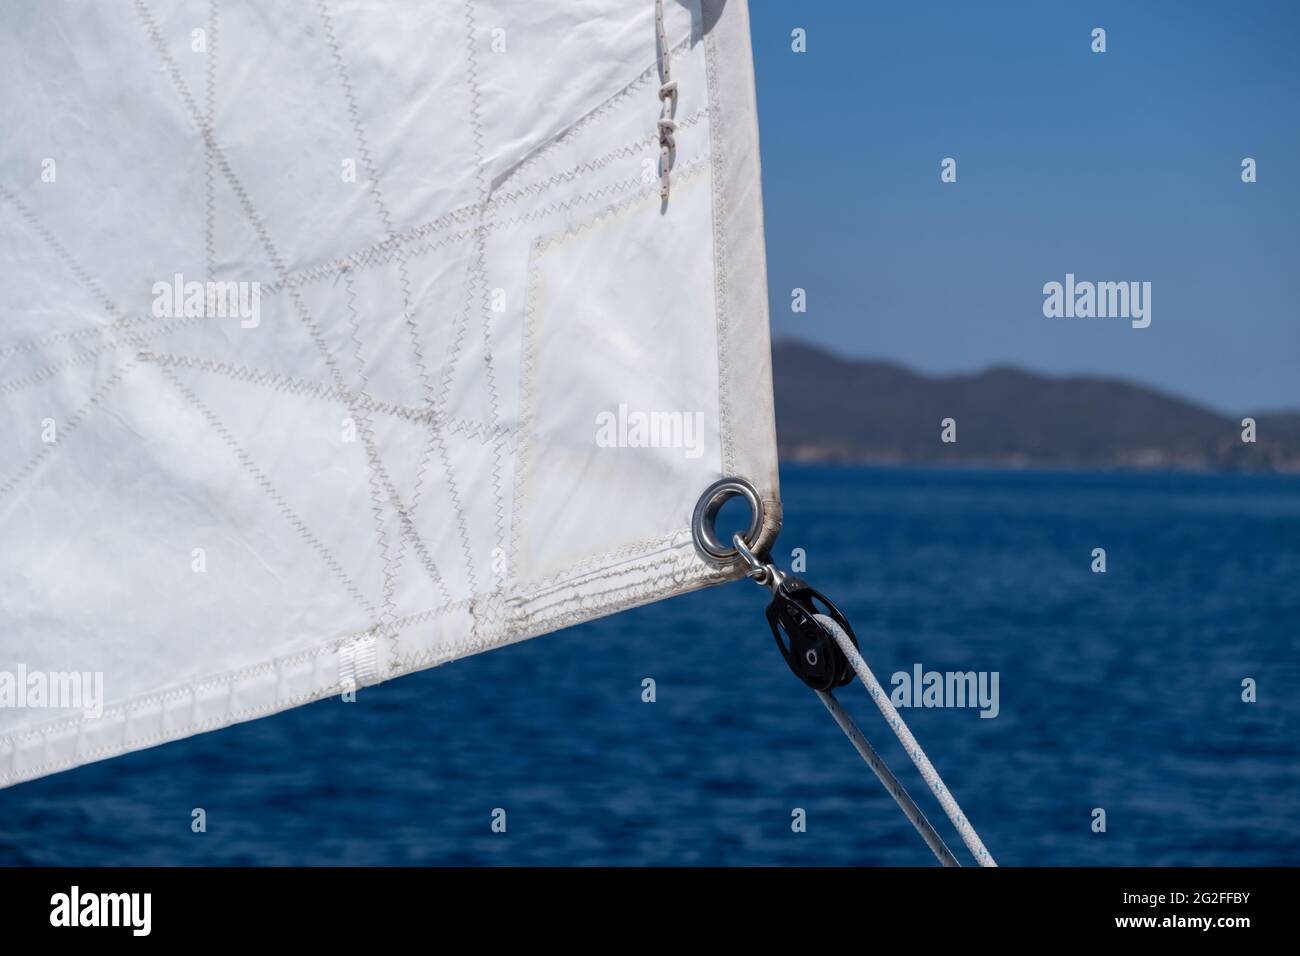 Sail detail, eyelet and rope closeup view. Yacht sailing in open calm ocean  background. Leisure activity, travel and transportation concept. Stock Photo